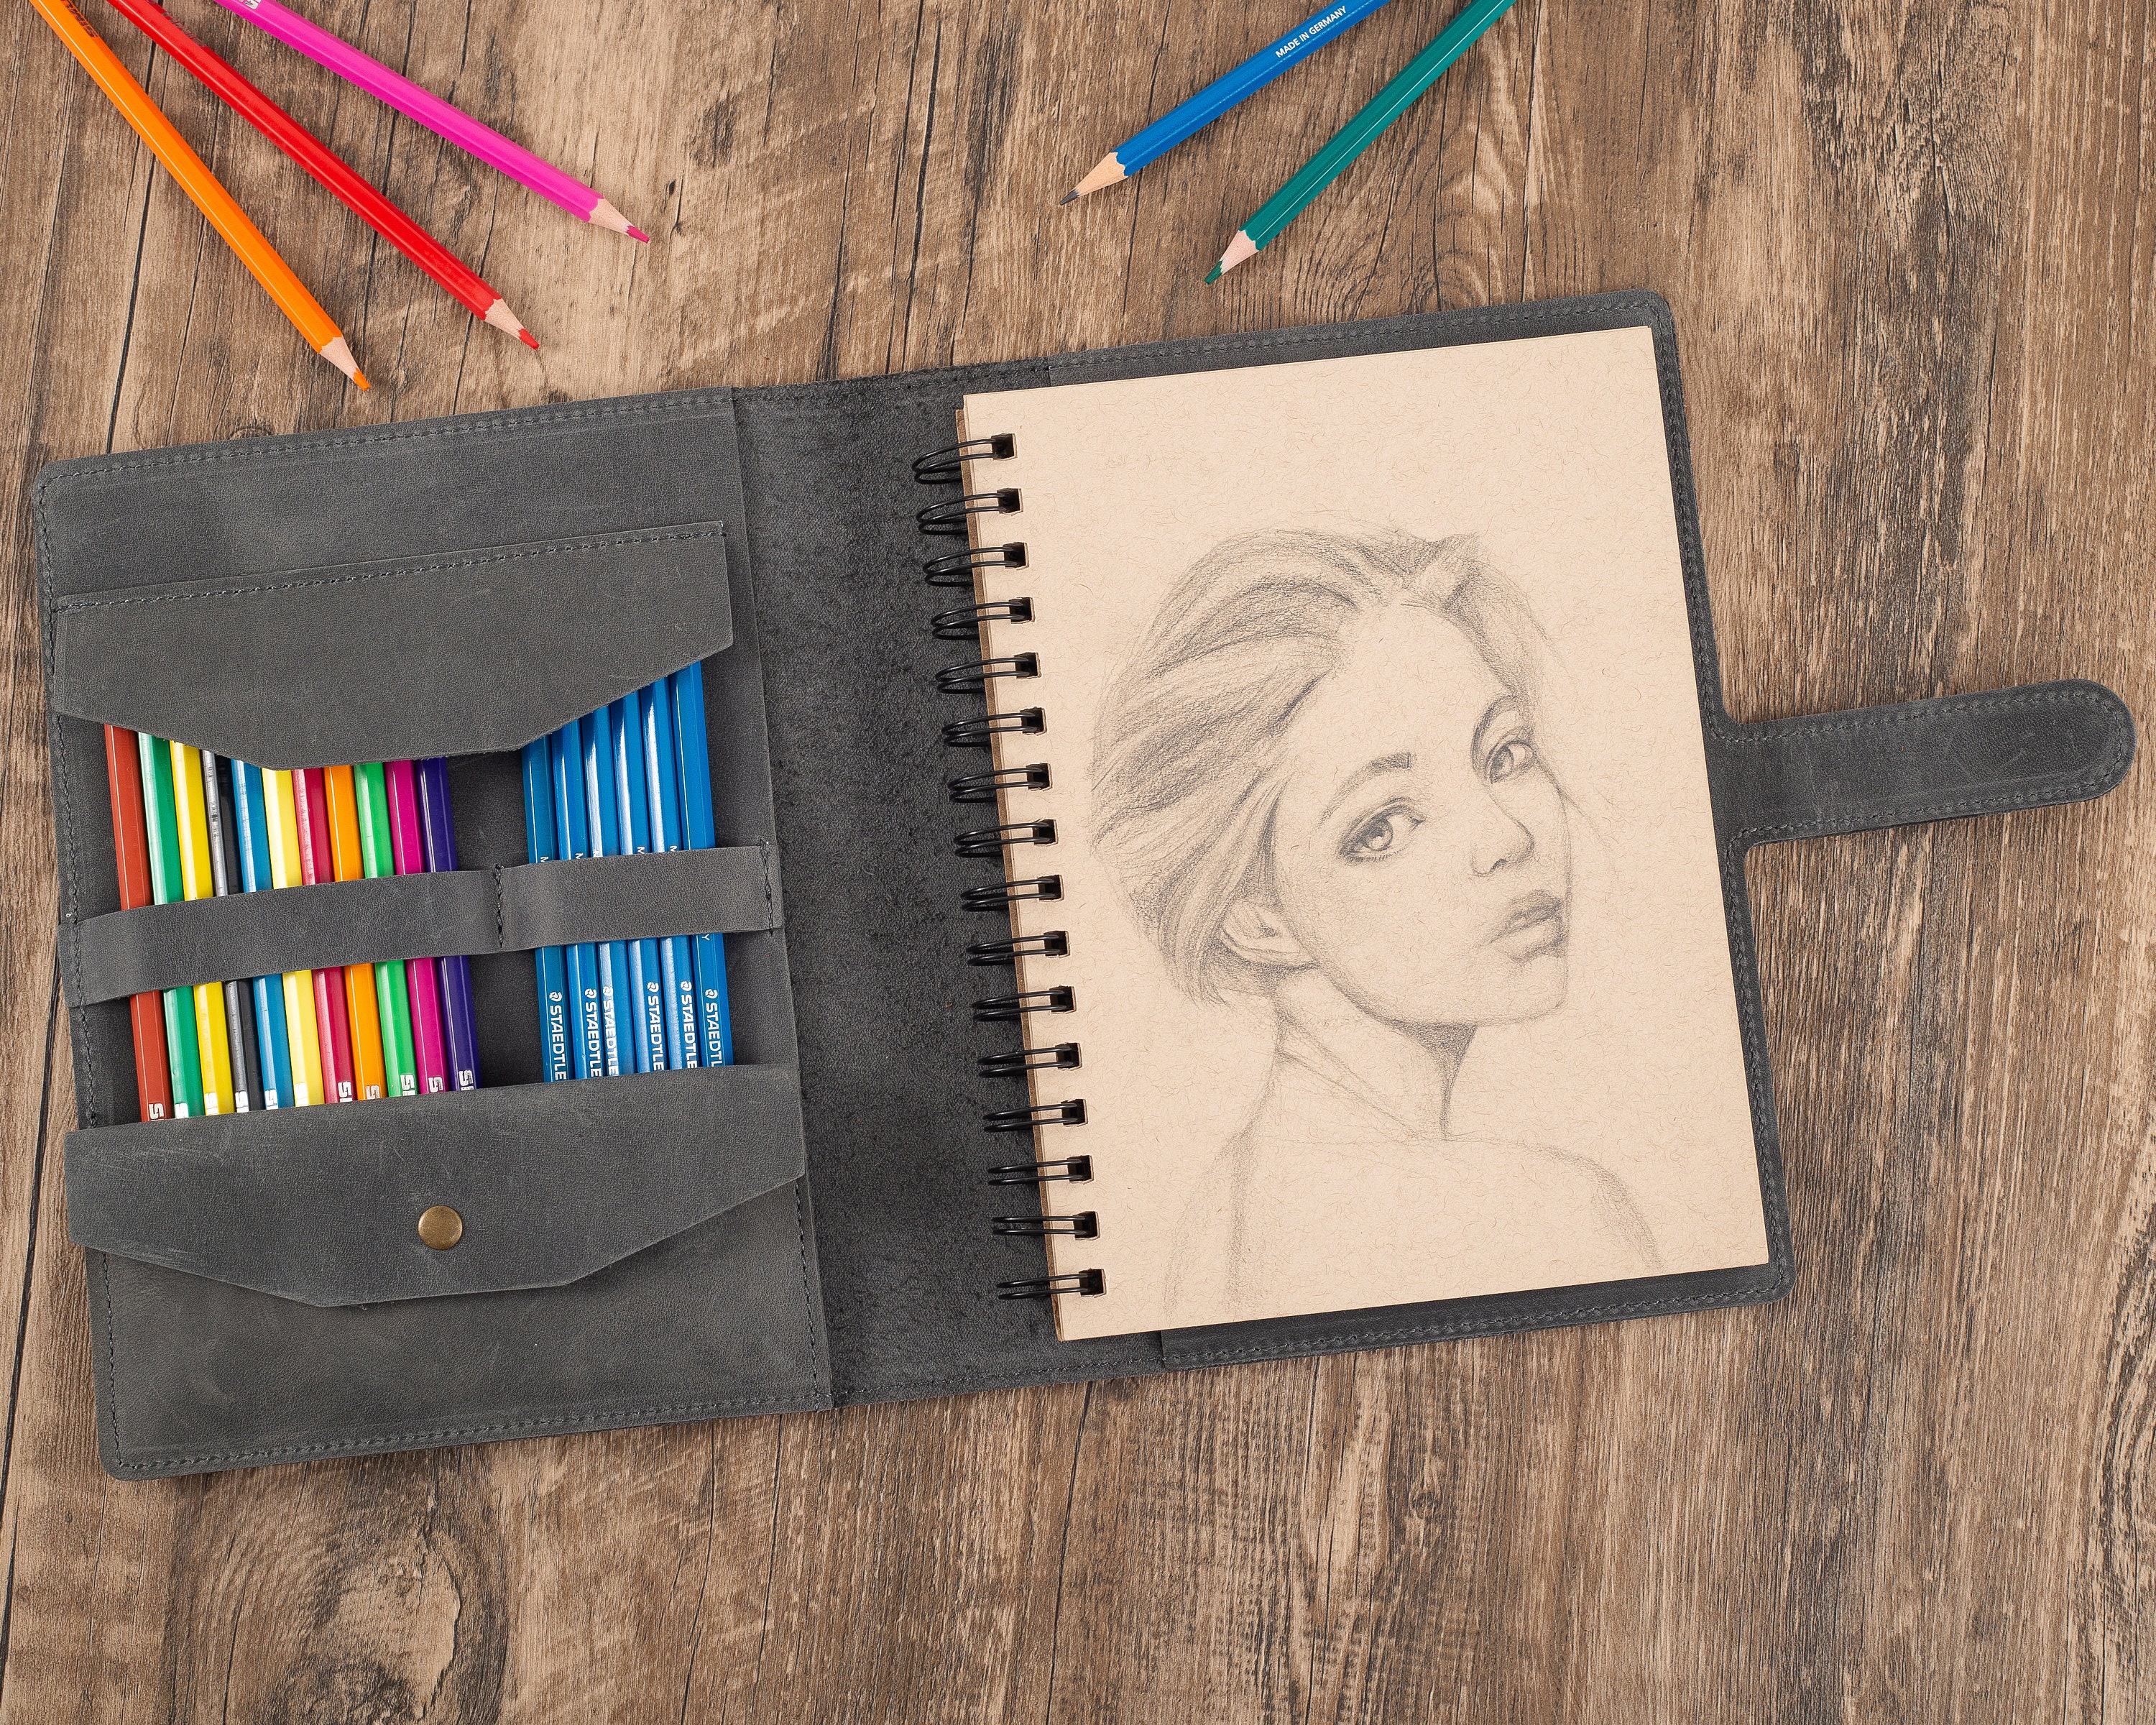 Personalized Sketchbook Case With Sketch Pad A5150x200mm and